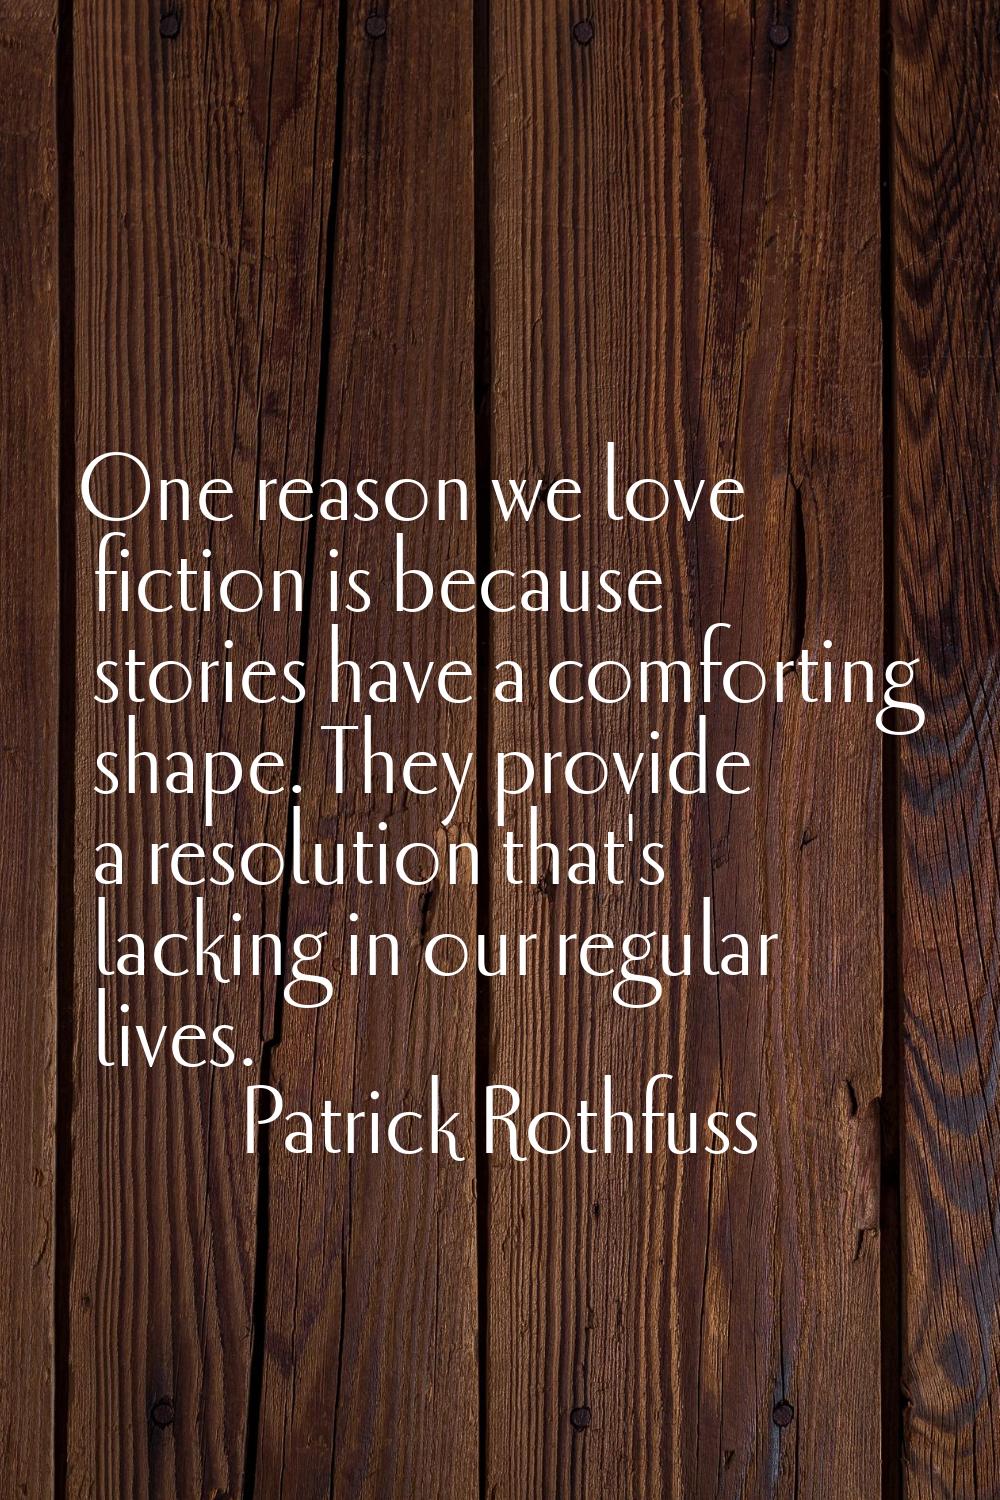 One reason we love fiction is because stories have a comforting shape. They provide a resolution th